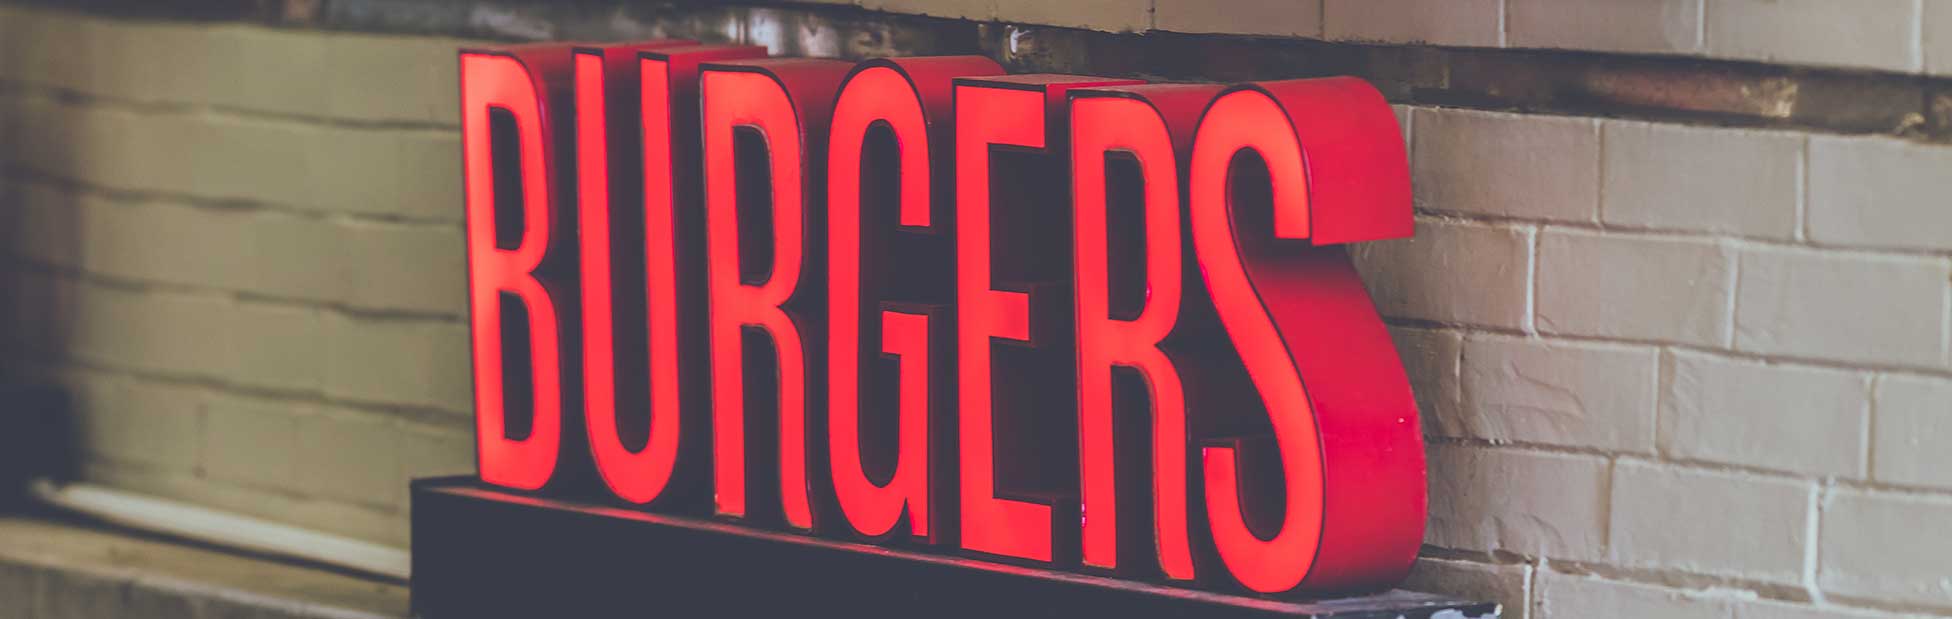 Red burger sign